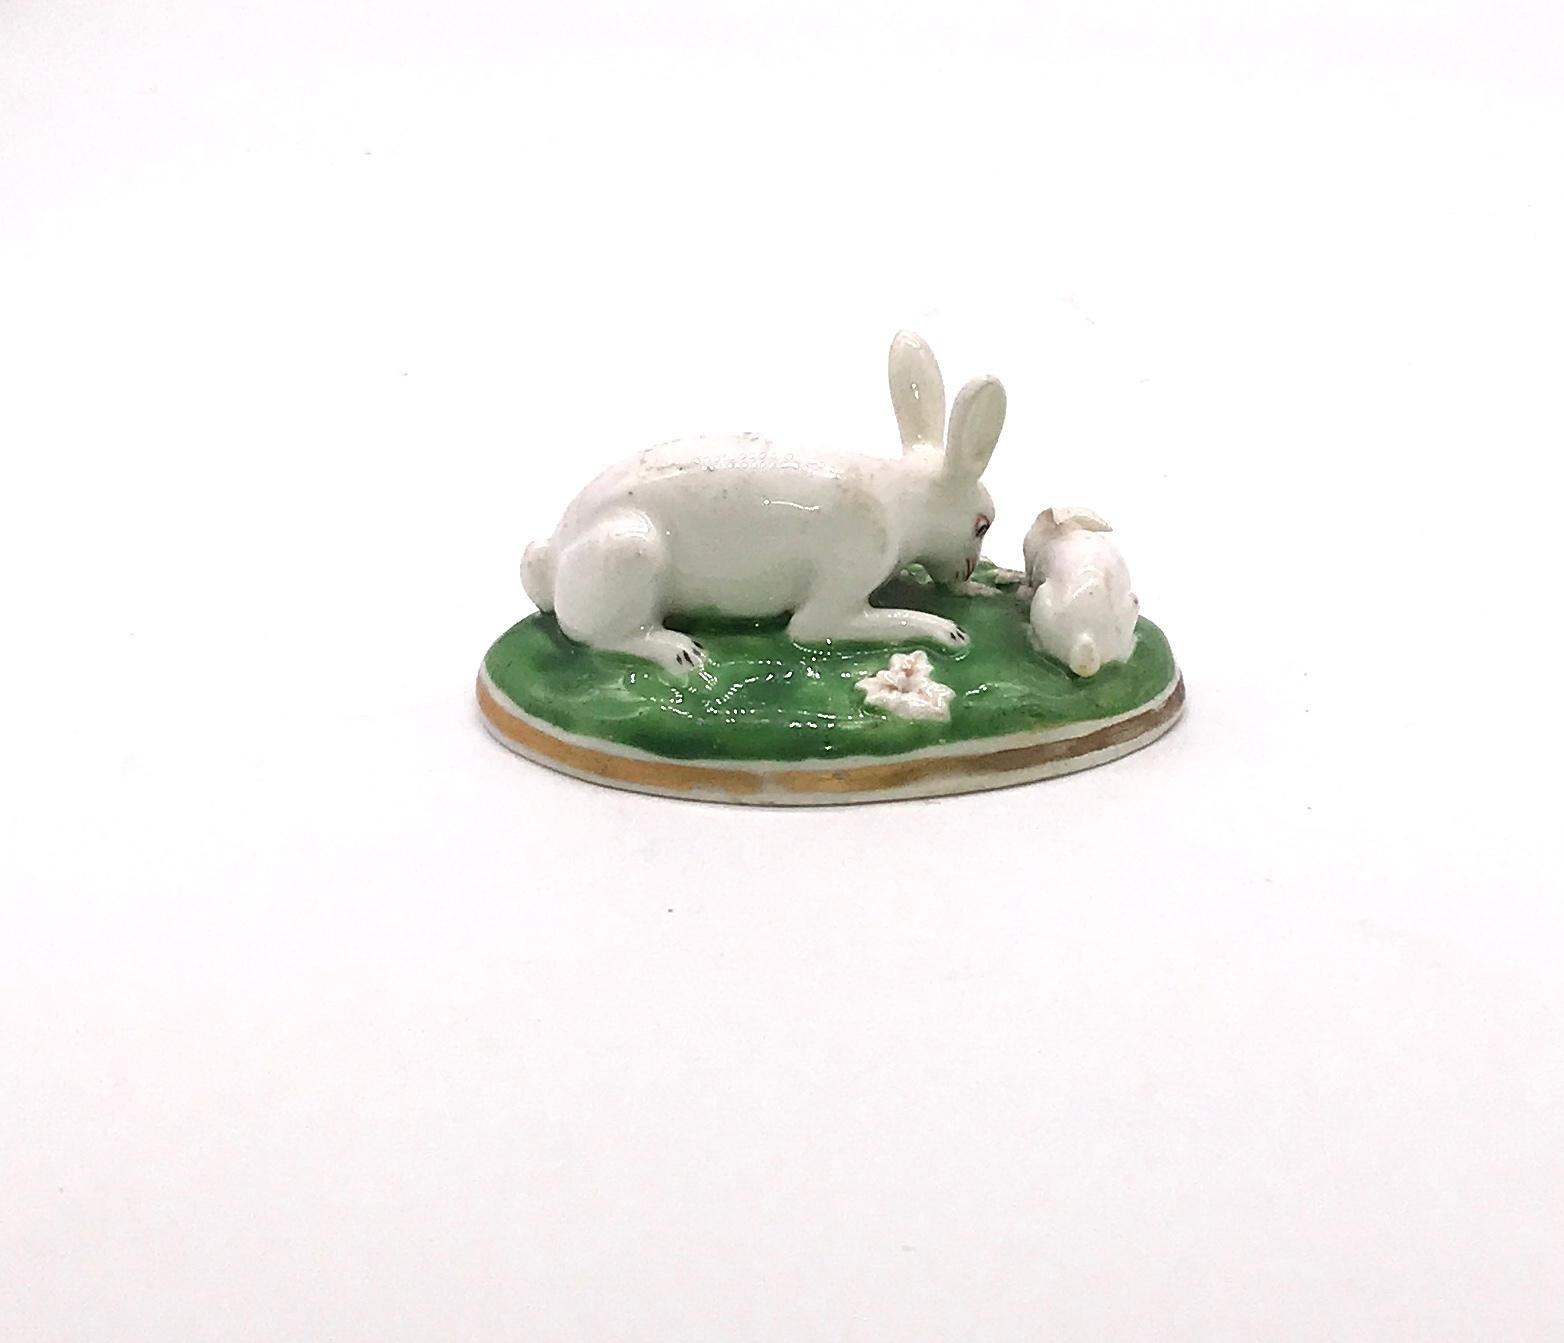 The fox's prey is the rabbit, and in the 19th century, rabbits abound in the countryside, so it is no surprise they are find in porcelain toys. Adorable Chamberlain Worcester porcelain rabbit mother with her young, in white on a green oval base, 3